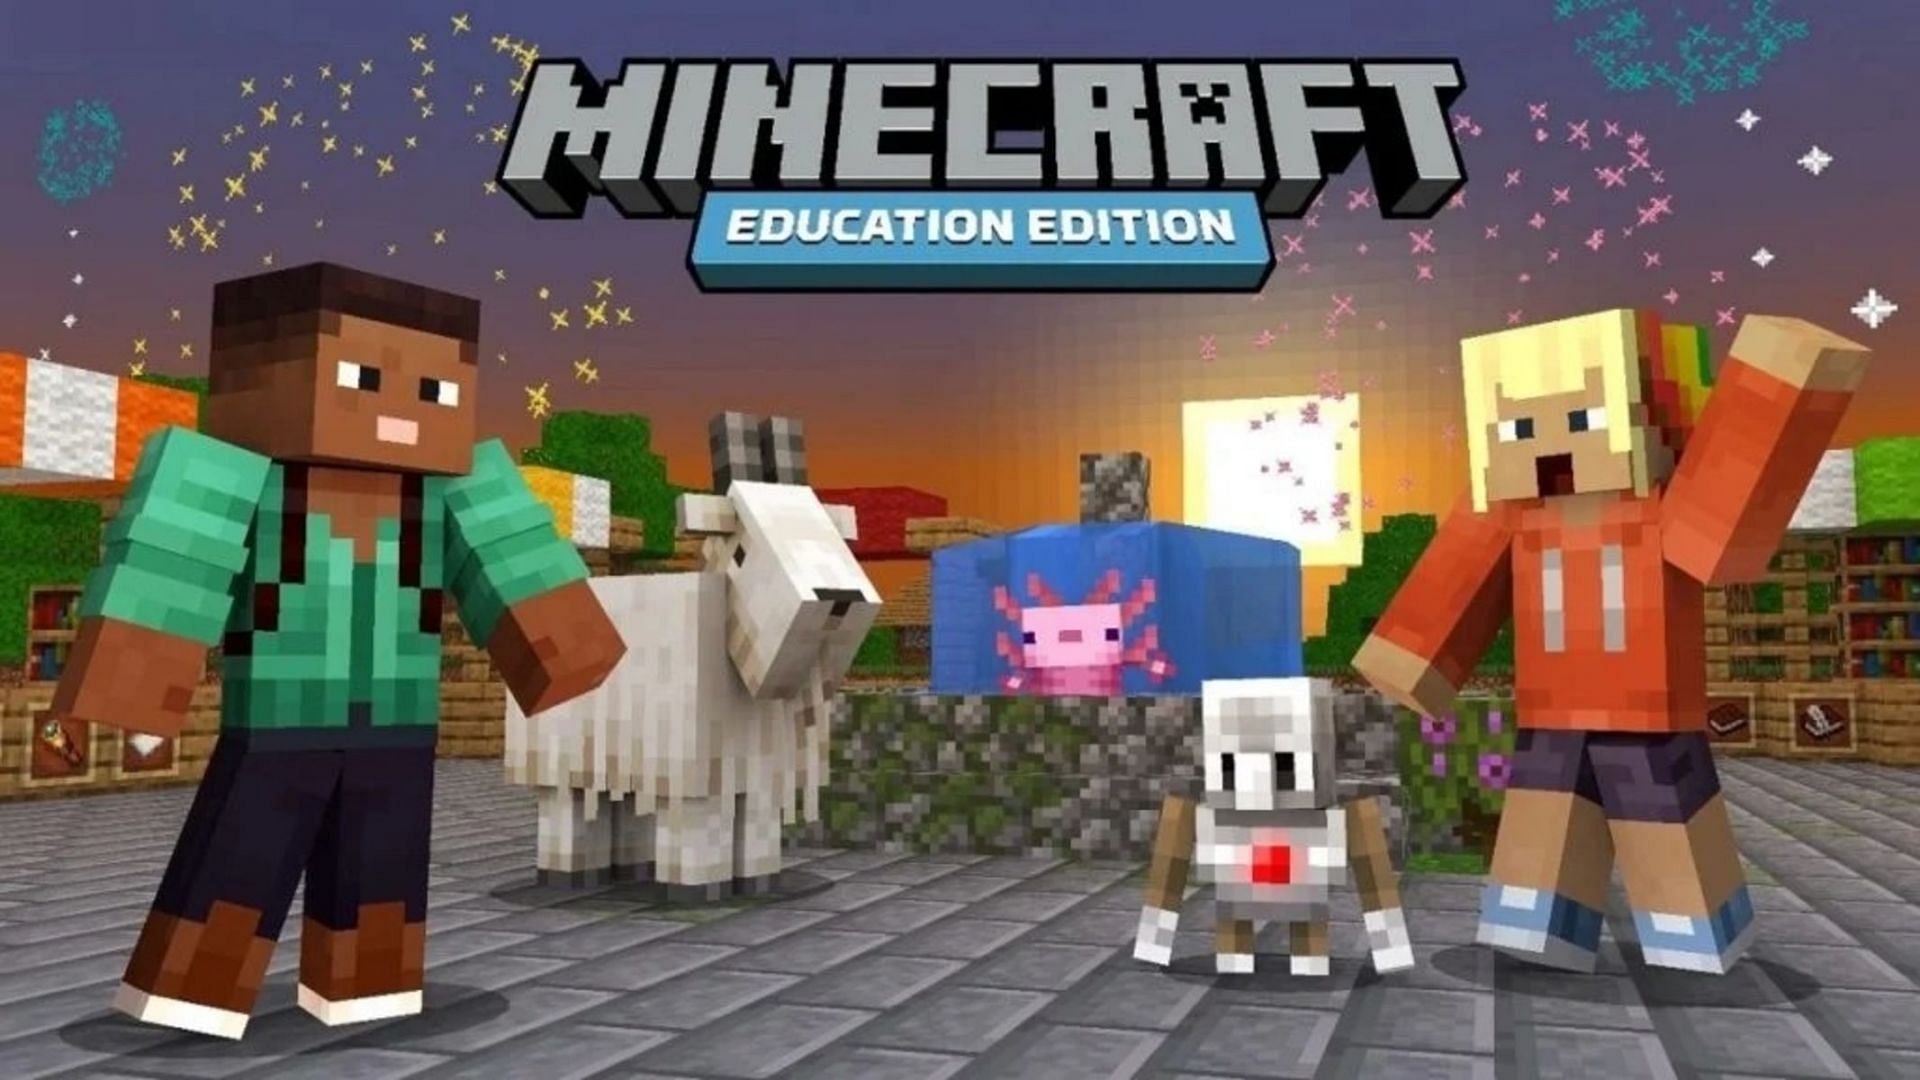 Education Edition is still going strong years after its release (Image via Mojang)